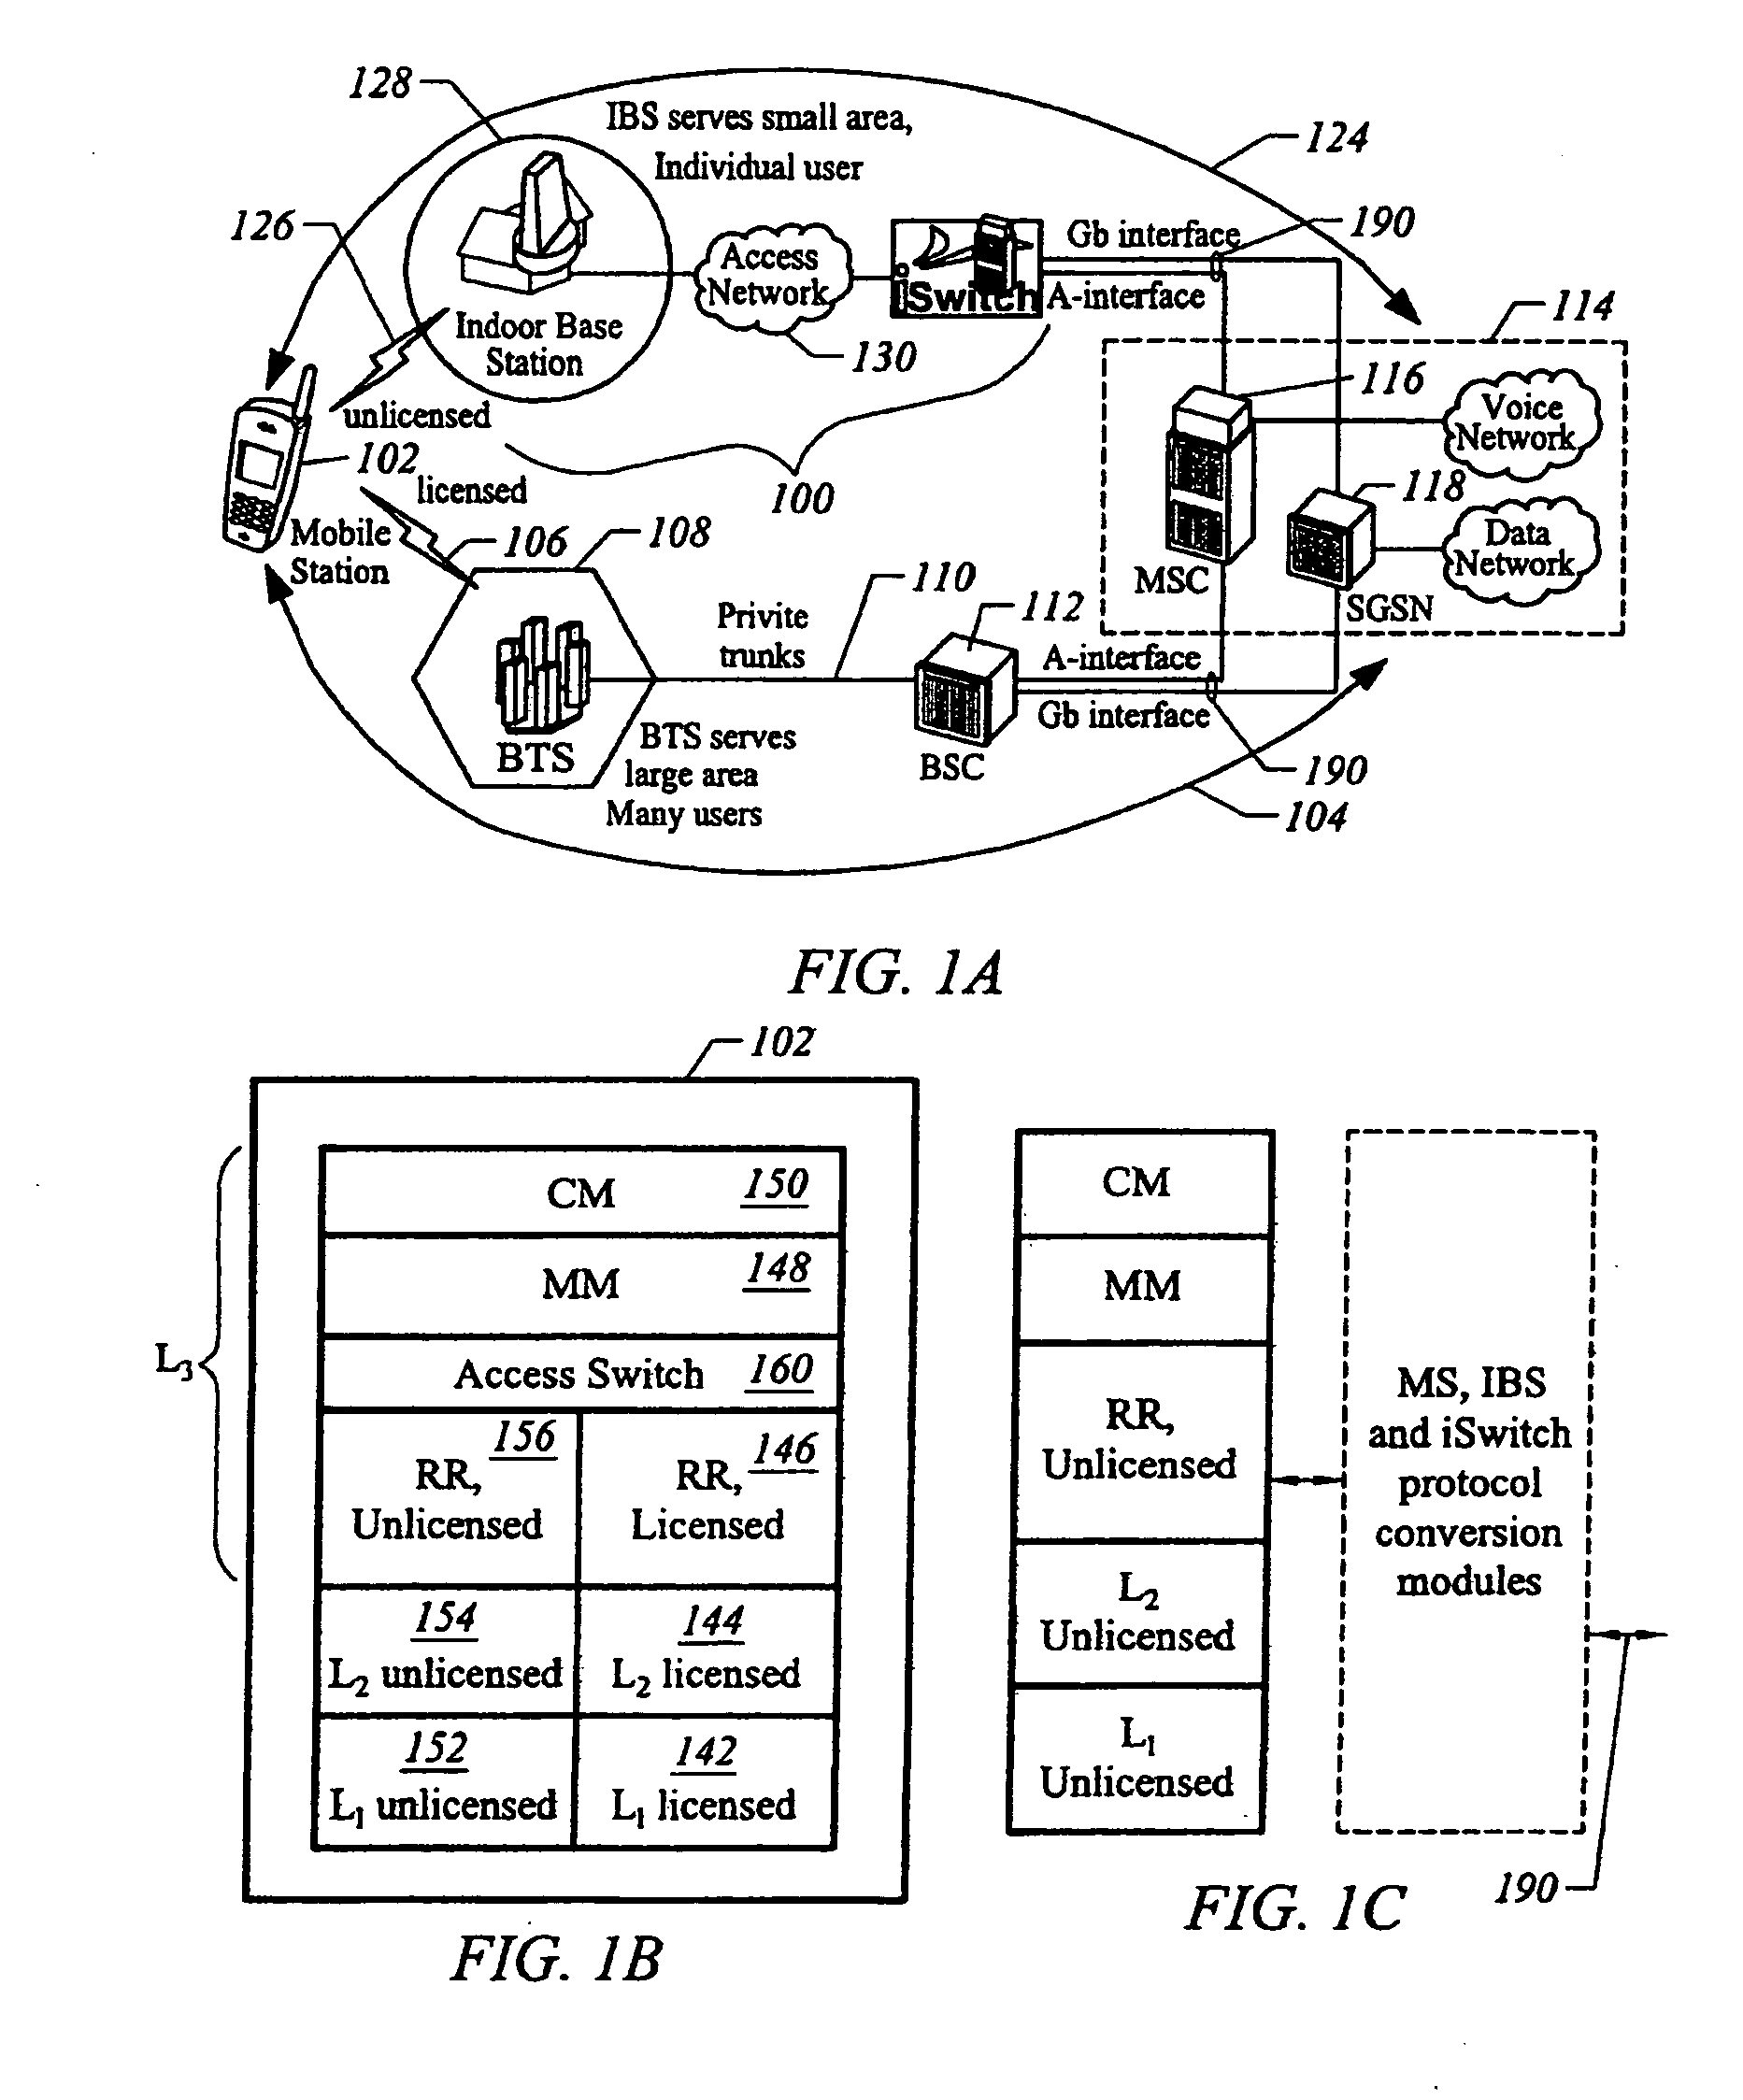 Apparatus and method for extending the coverage area of a licensed wireless communication system using an unlicensed wireless communication system